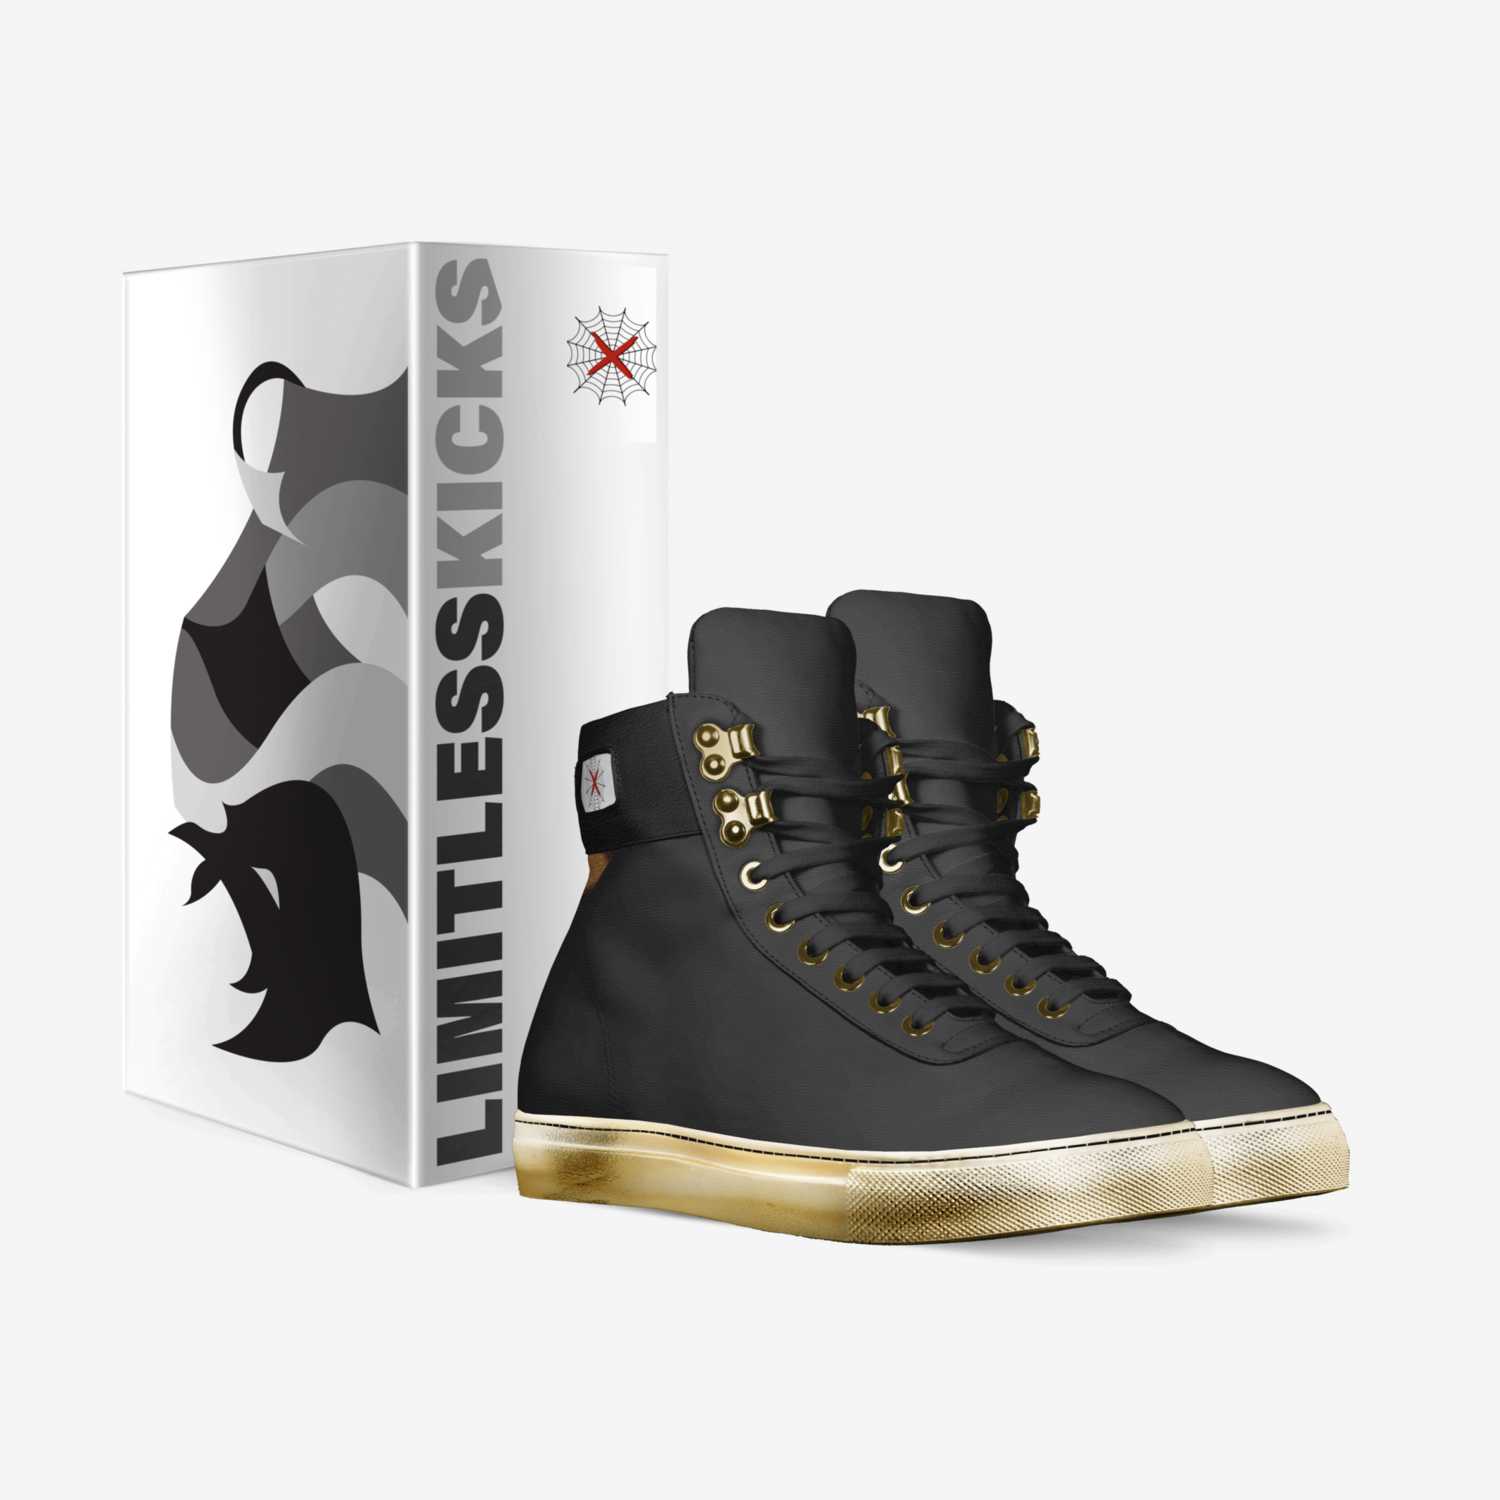 Limitless X custom made in Italy shoes by Limitless Kicks | Box view